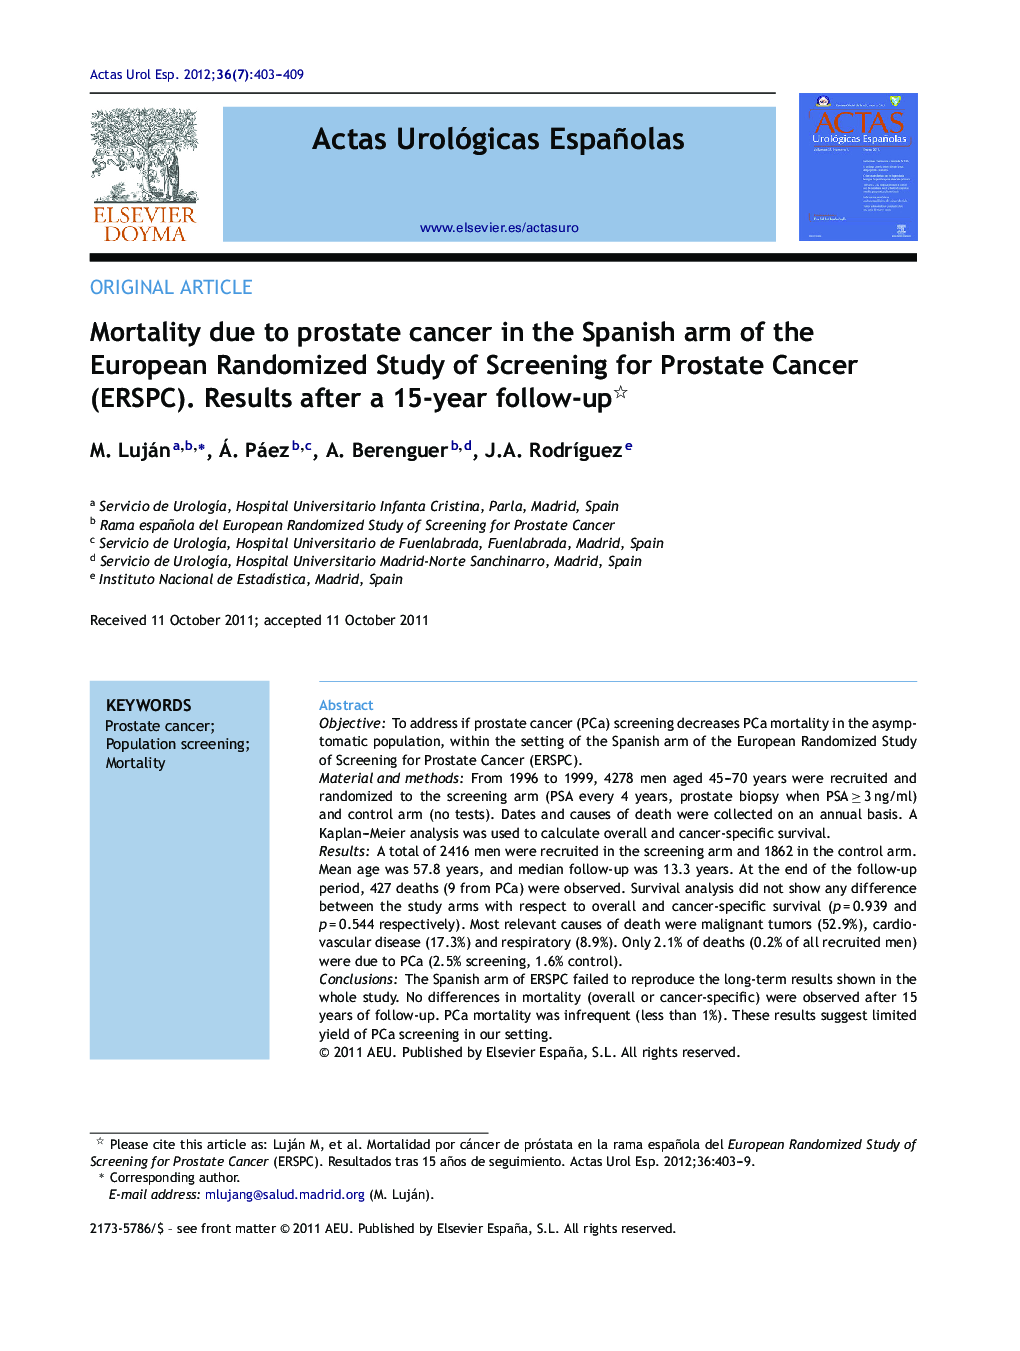 Mortality due to prostate cancer in the Spanish arm of the European Randomized Study of Screening for Prostate Cancer (ERSPC). Results after a 15-year follow-up 